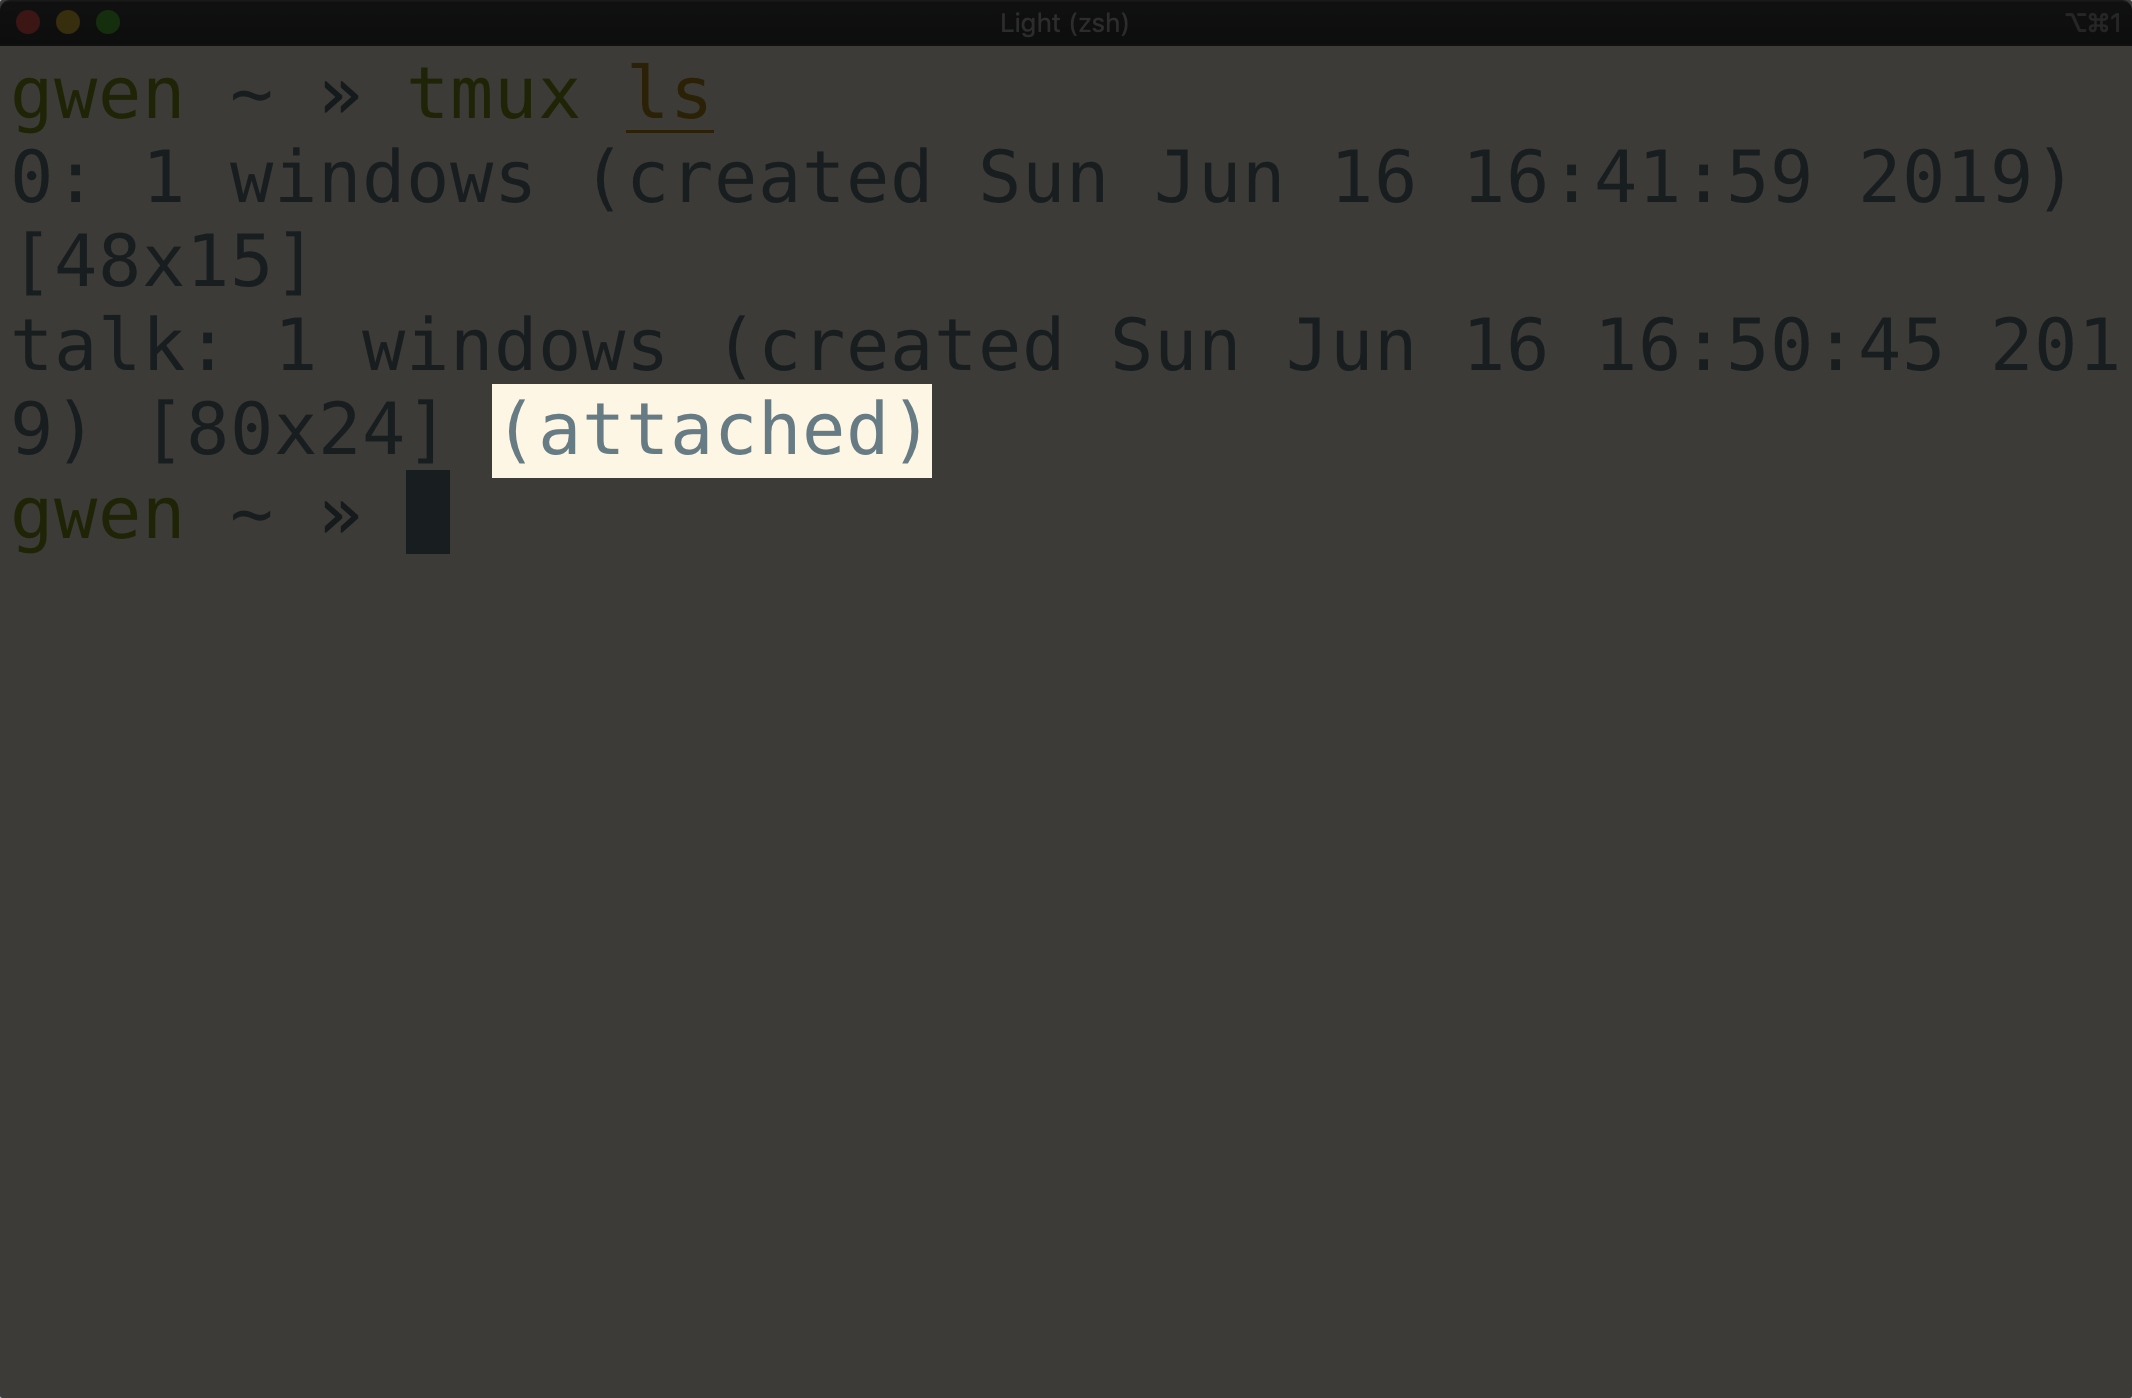 Terminal window showing <code>tmux ls</code> output with attached
highlighted